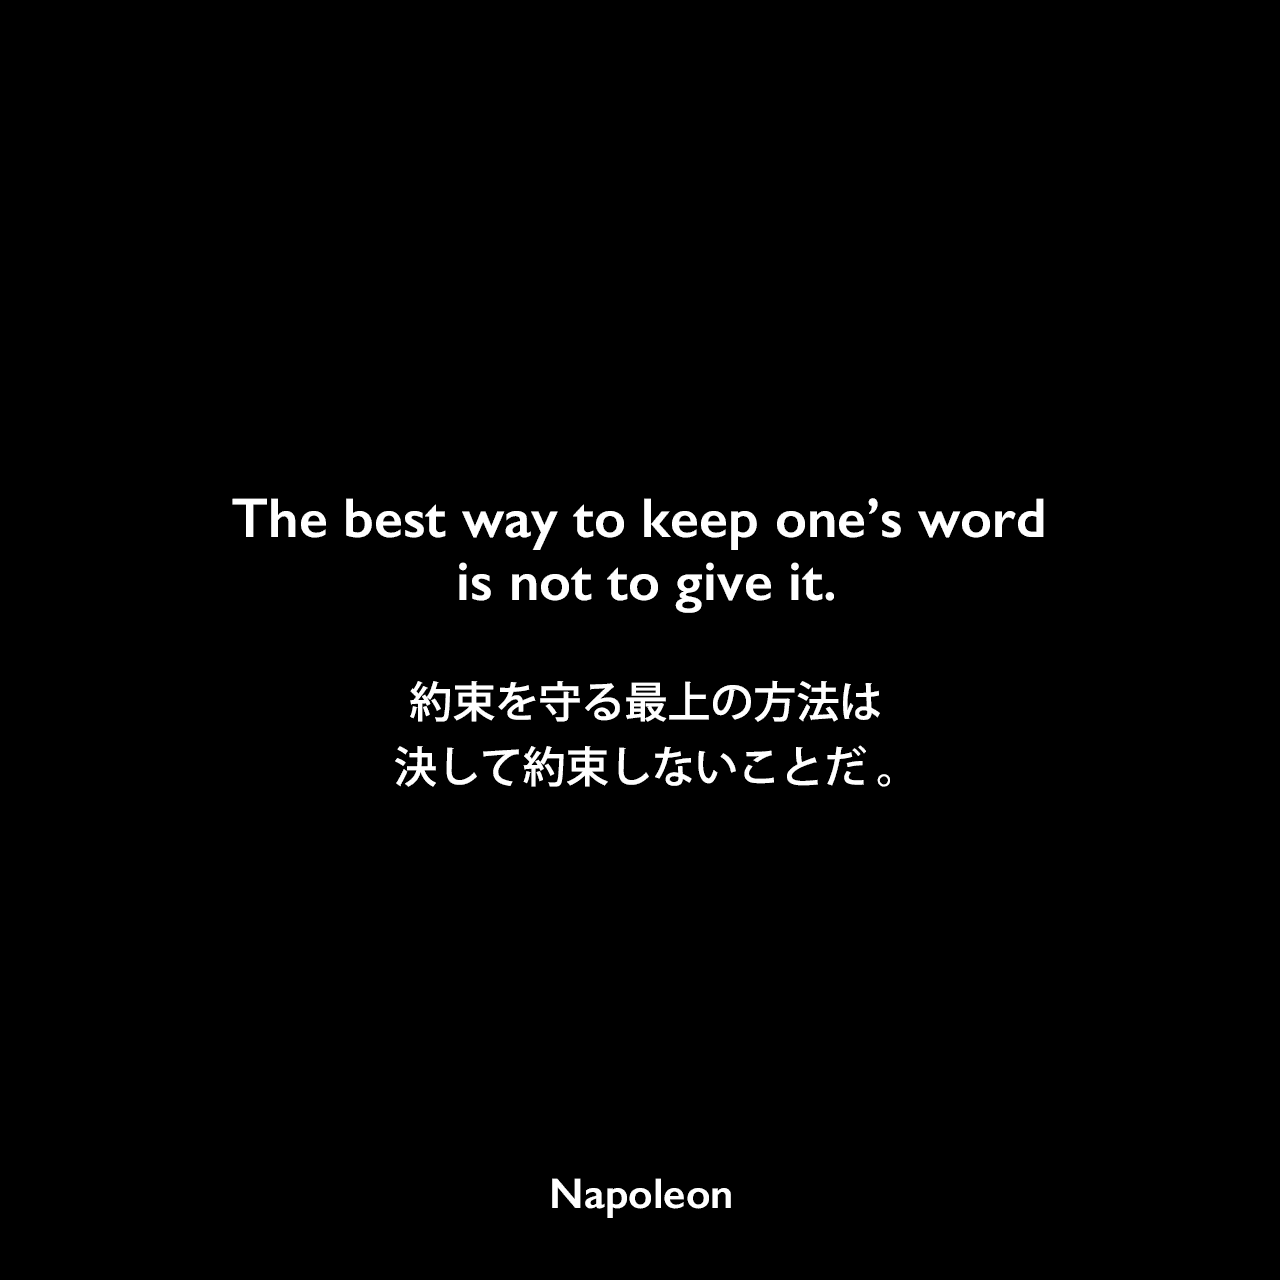 The best way to keep one’s word is not to give it.約束を守る最上の方法は、決して約束しないことだ 。- 「Napoleon in his own words」よりNapoleon